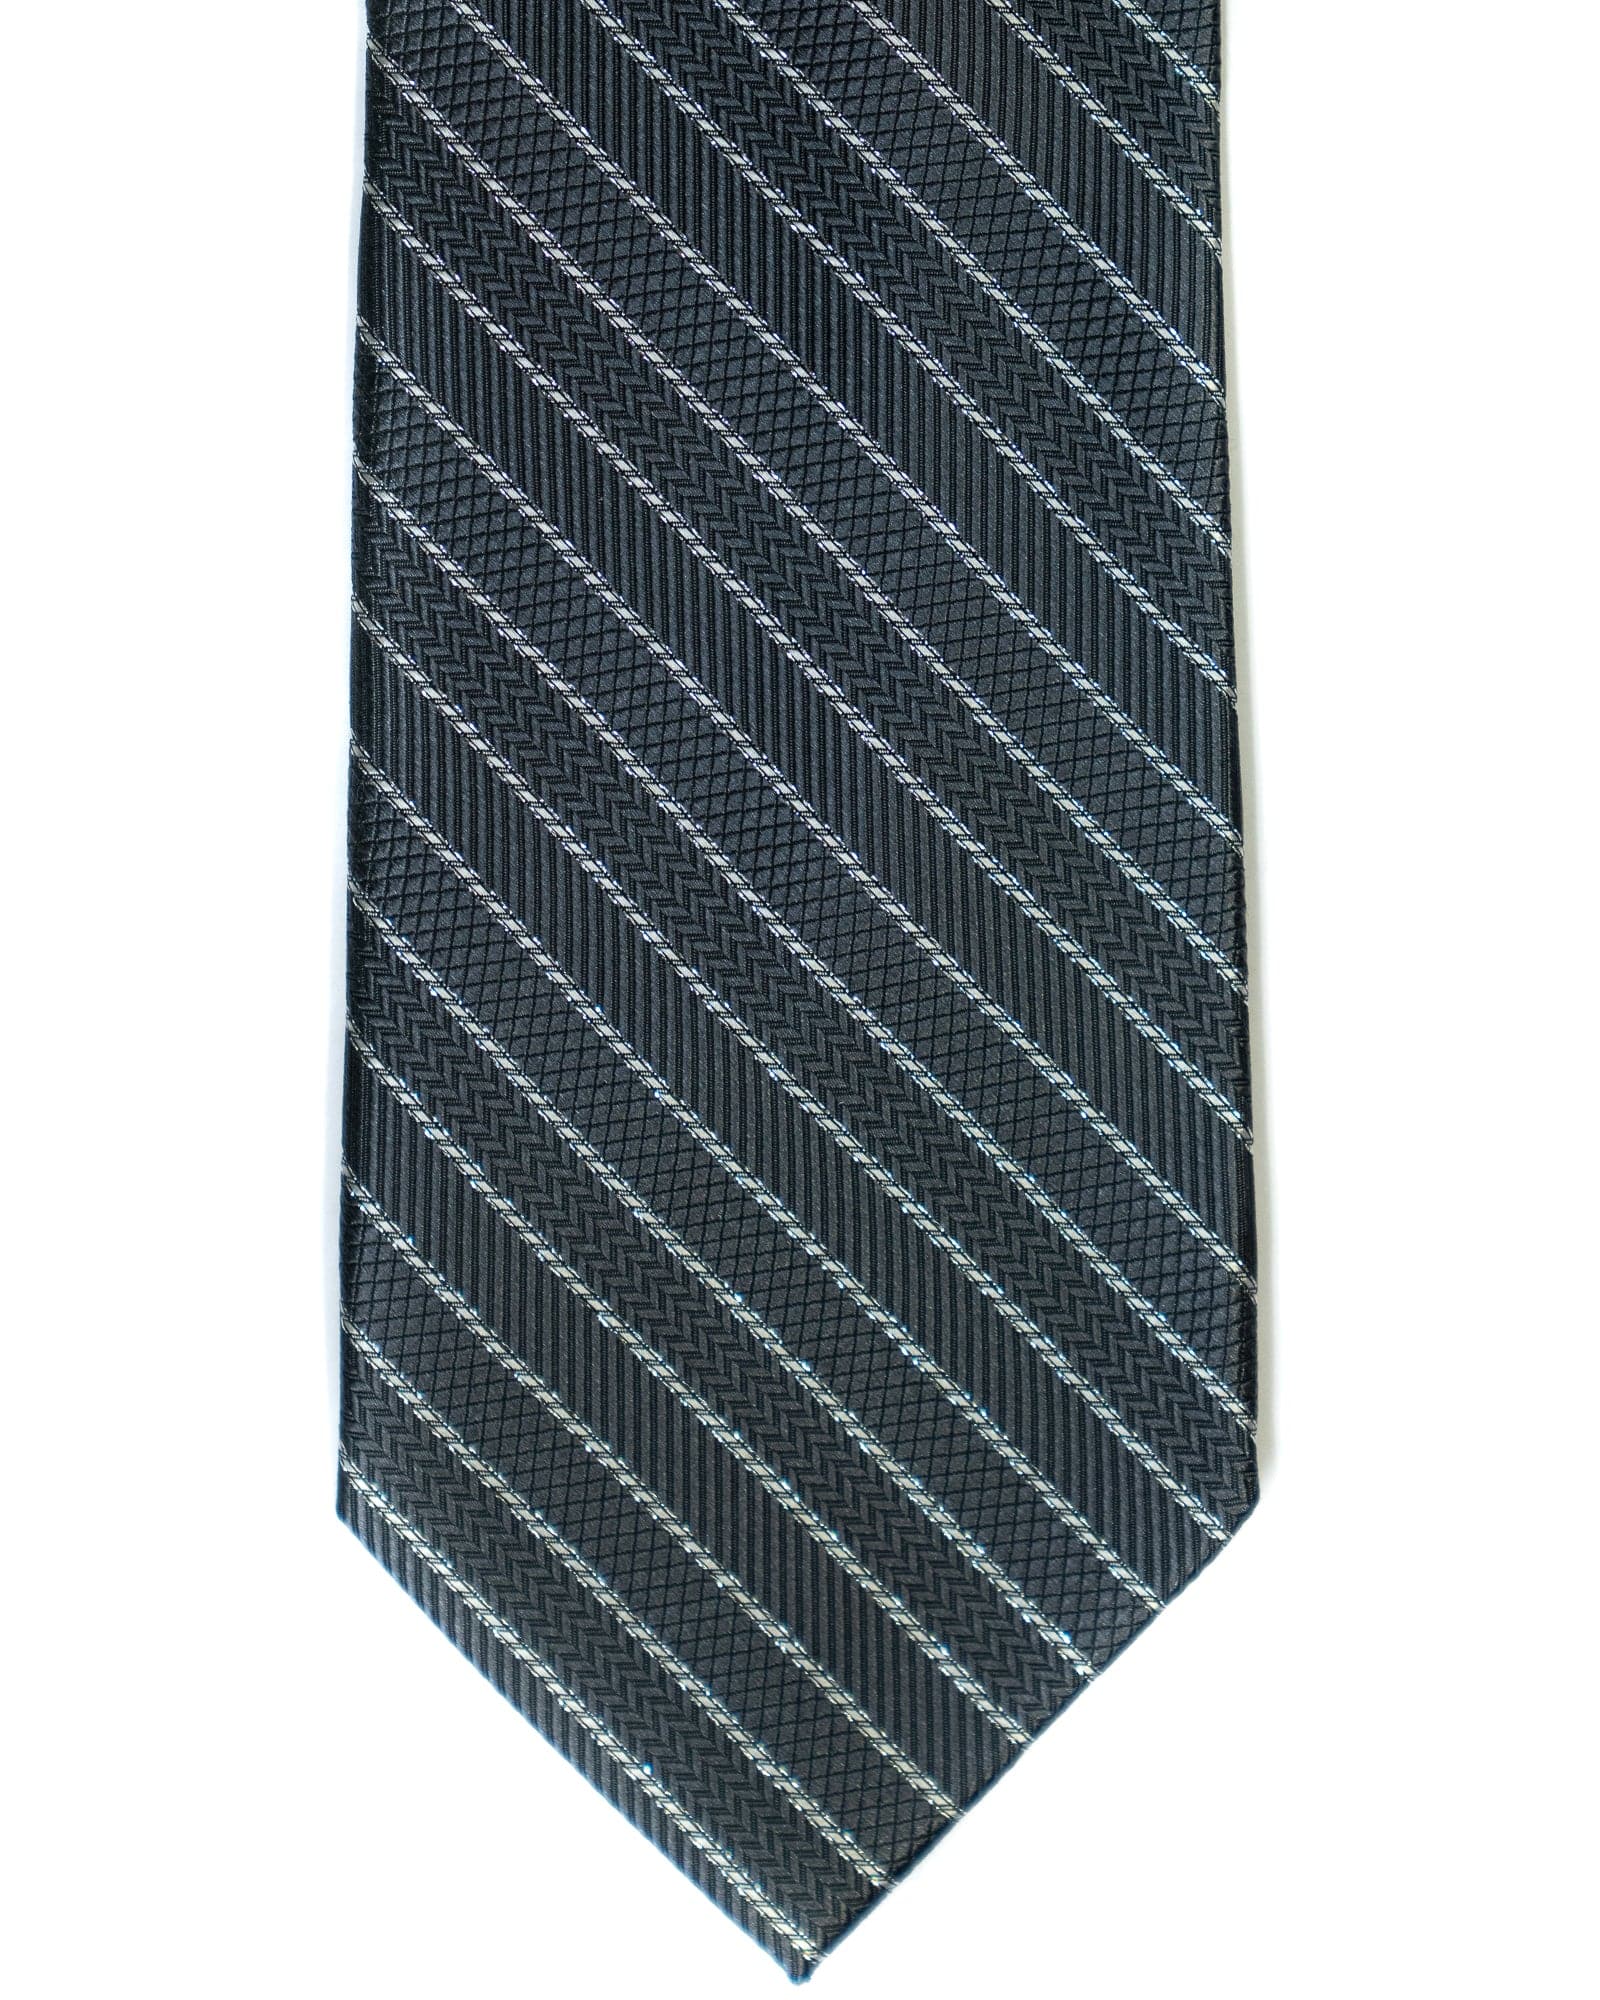 Silk Tie In Grey With Silver Stripes - Rainwater's Men's Clothing and Tuxedo Rental